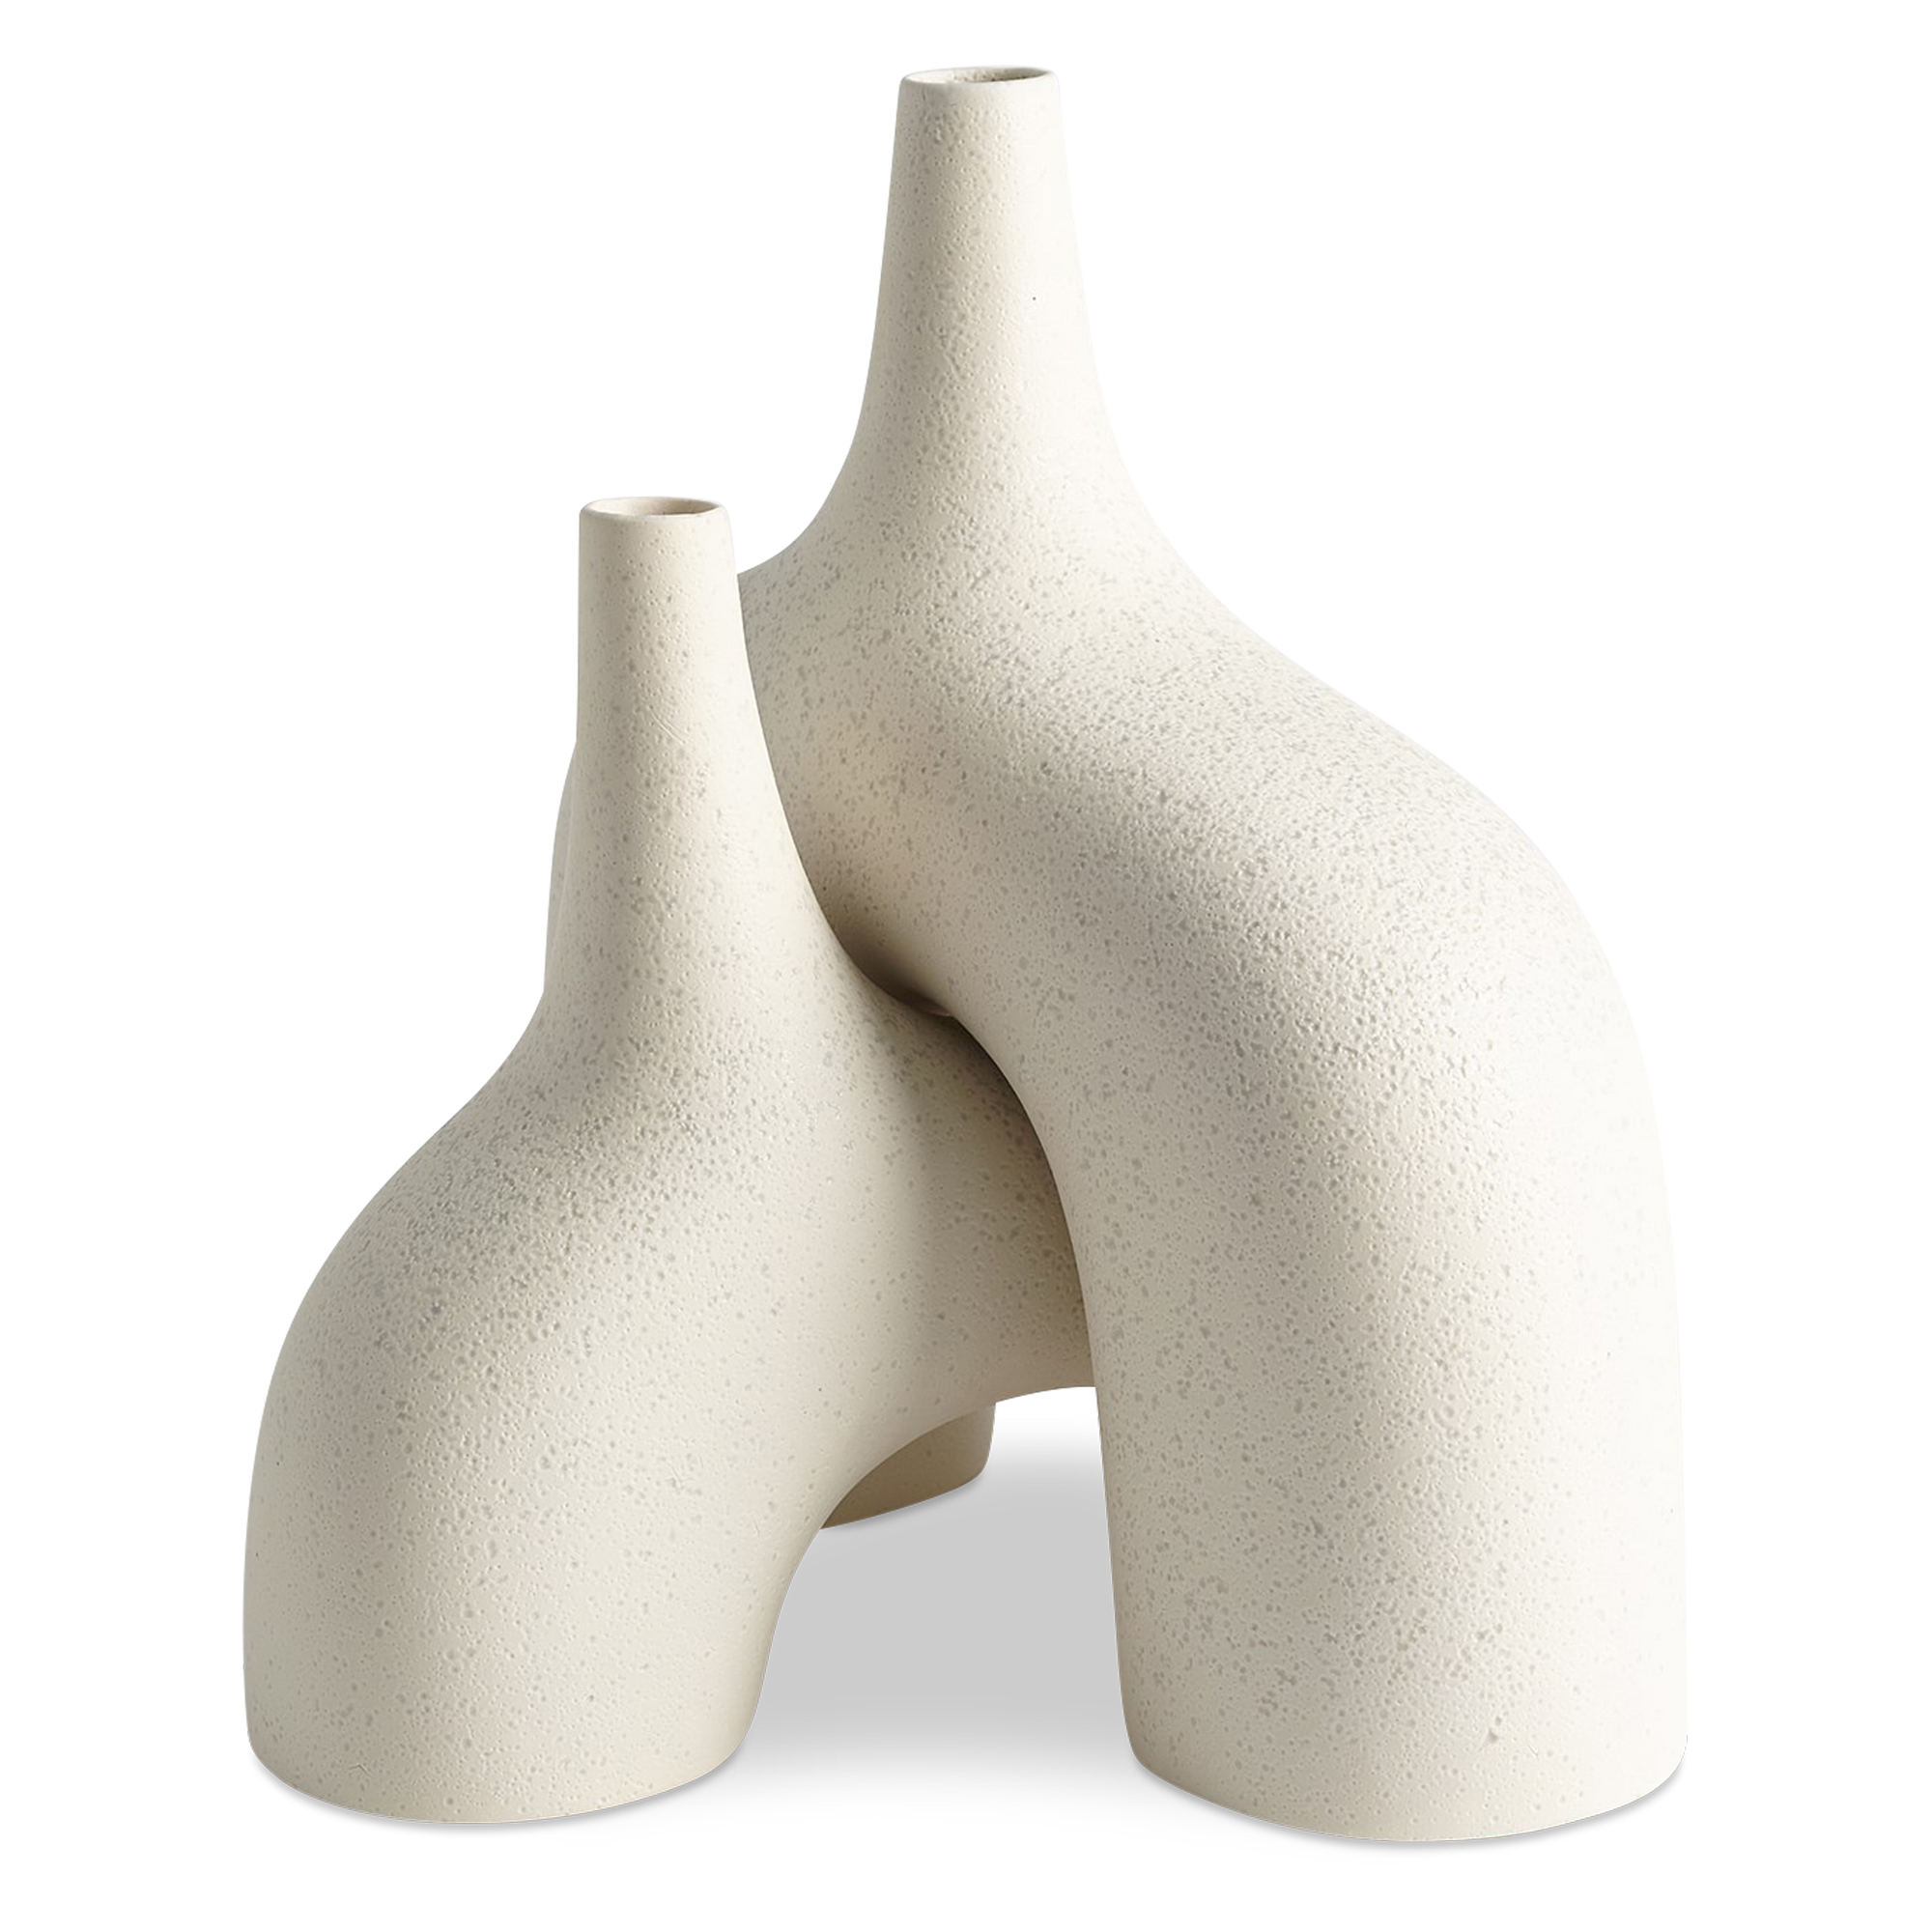 Reminiscent of the 1960's lava glaze ceramics, the Stretch Vases in cream are slip cast vessels that nest/straddle each other.